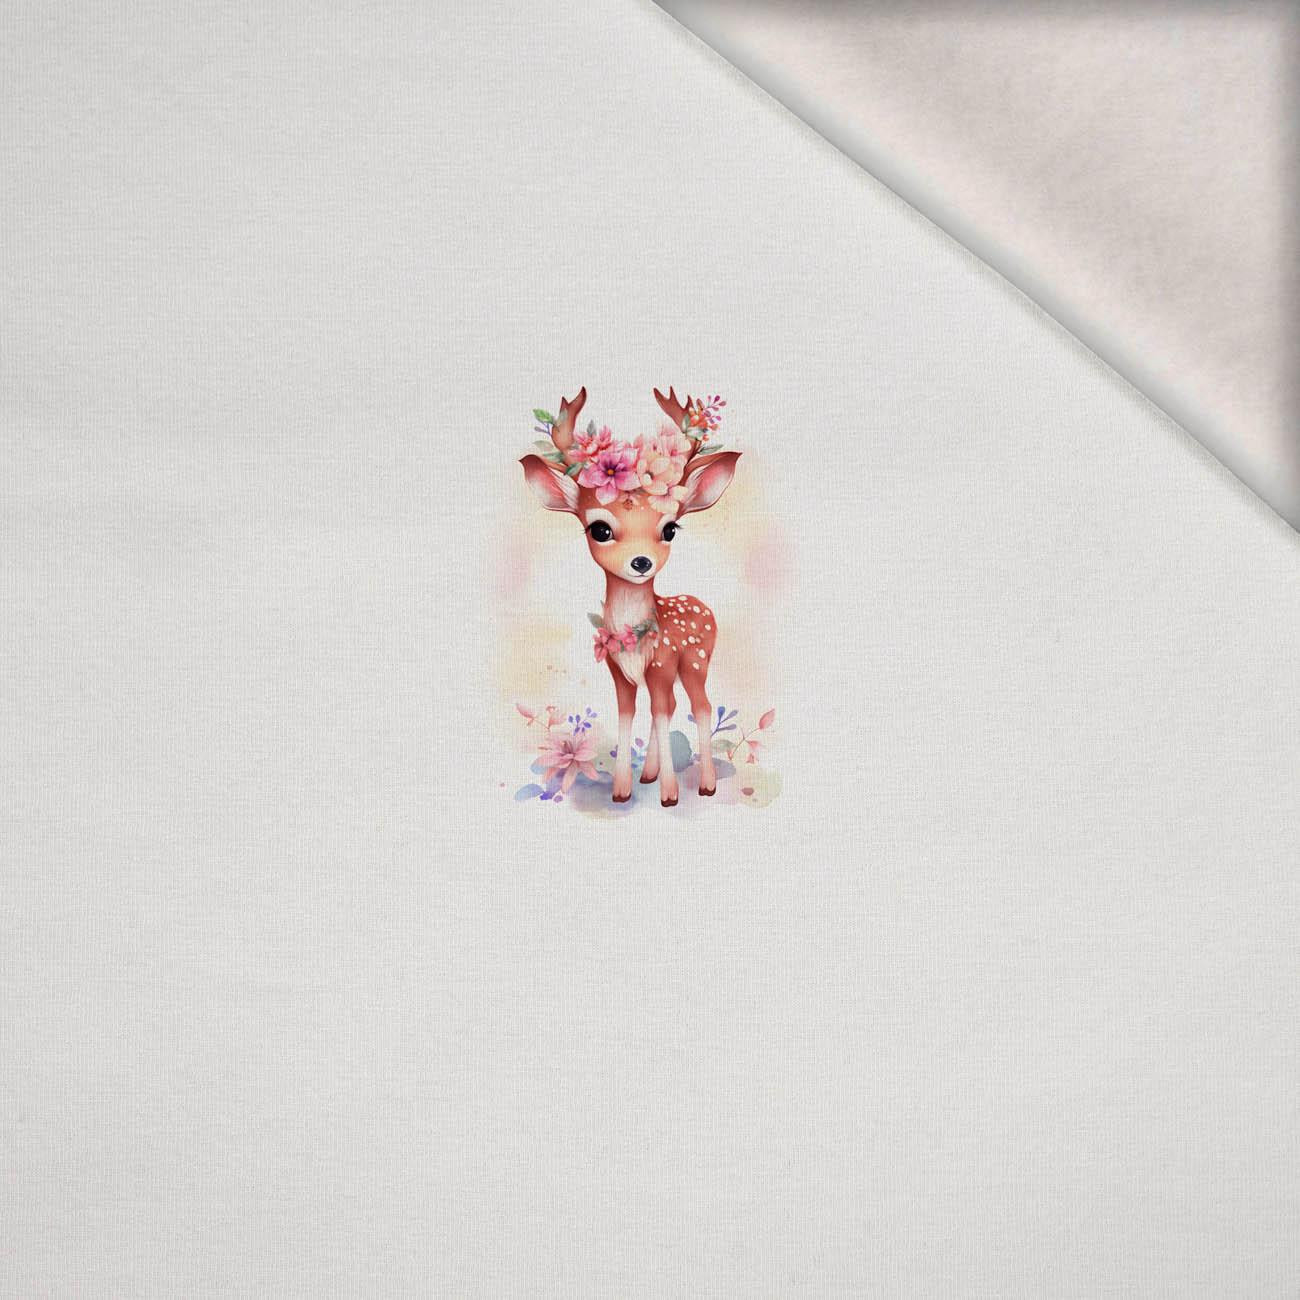 BABY DEER -  PANEL (60cm x 50cm) brushed knitwear with elastane ITY